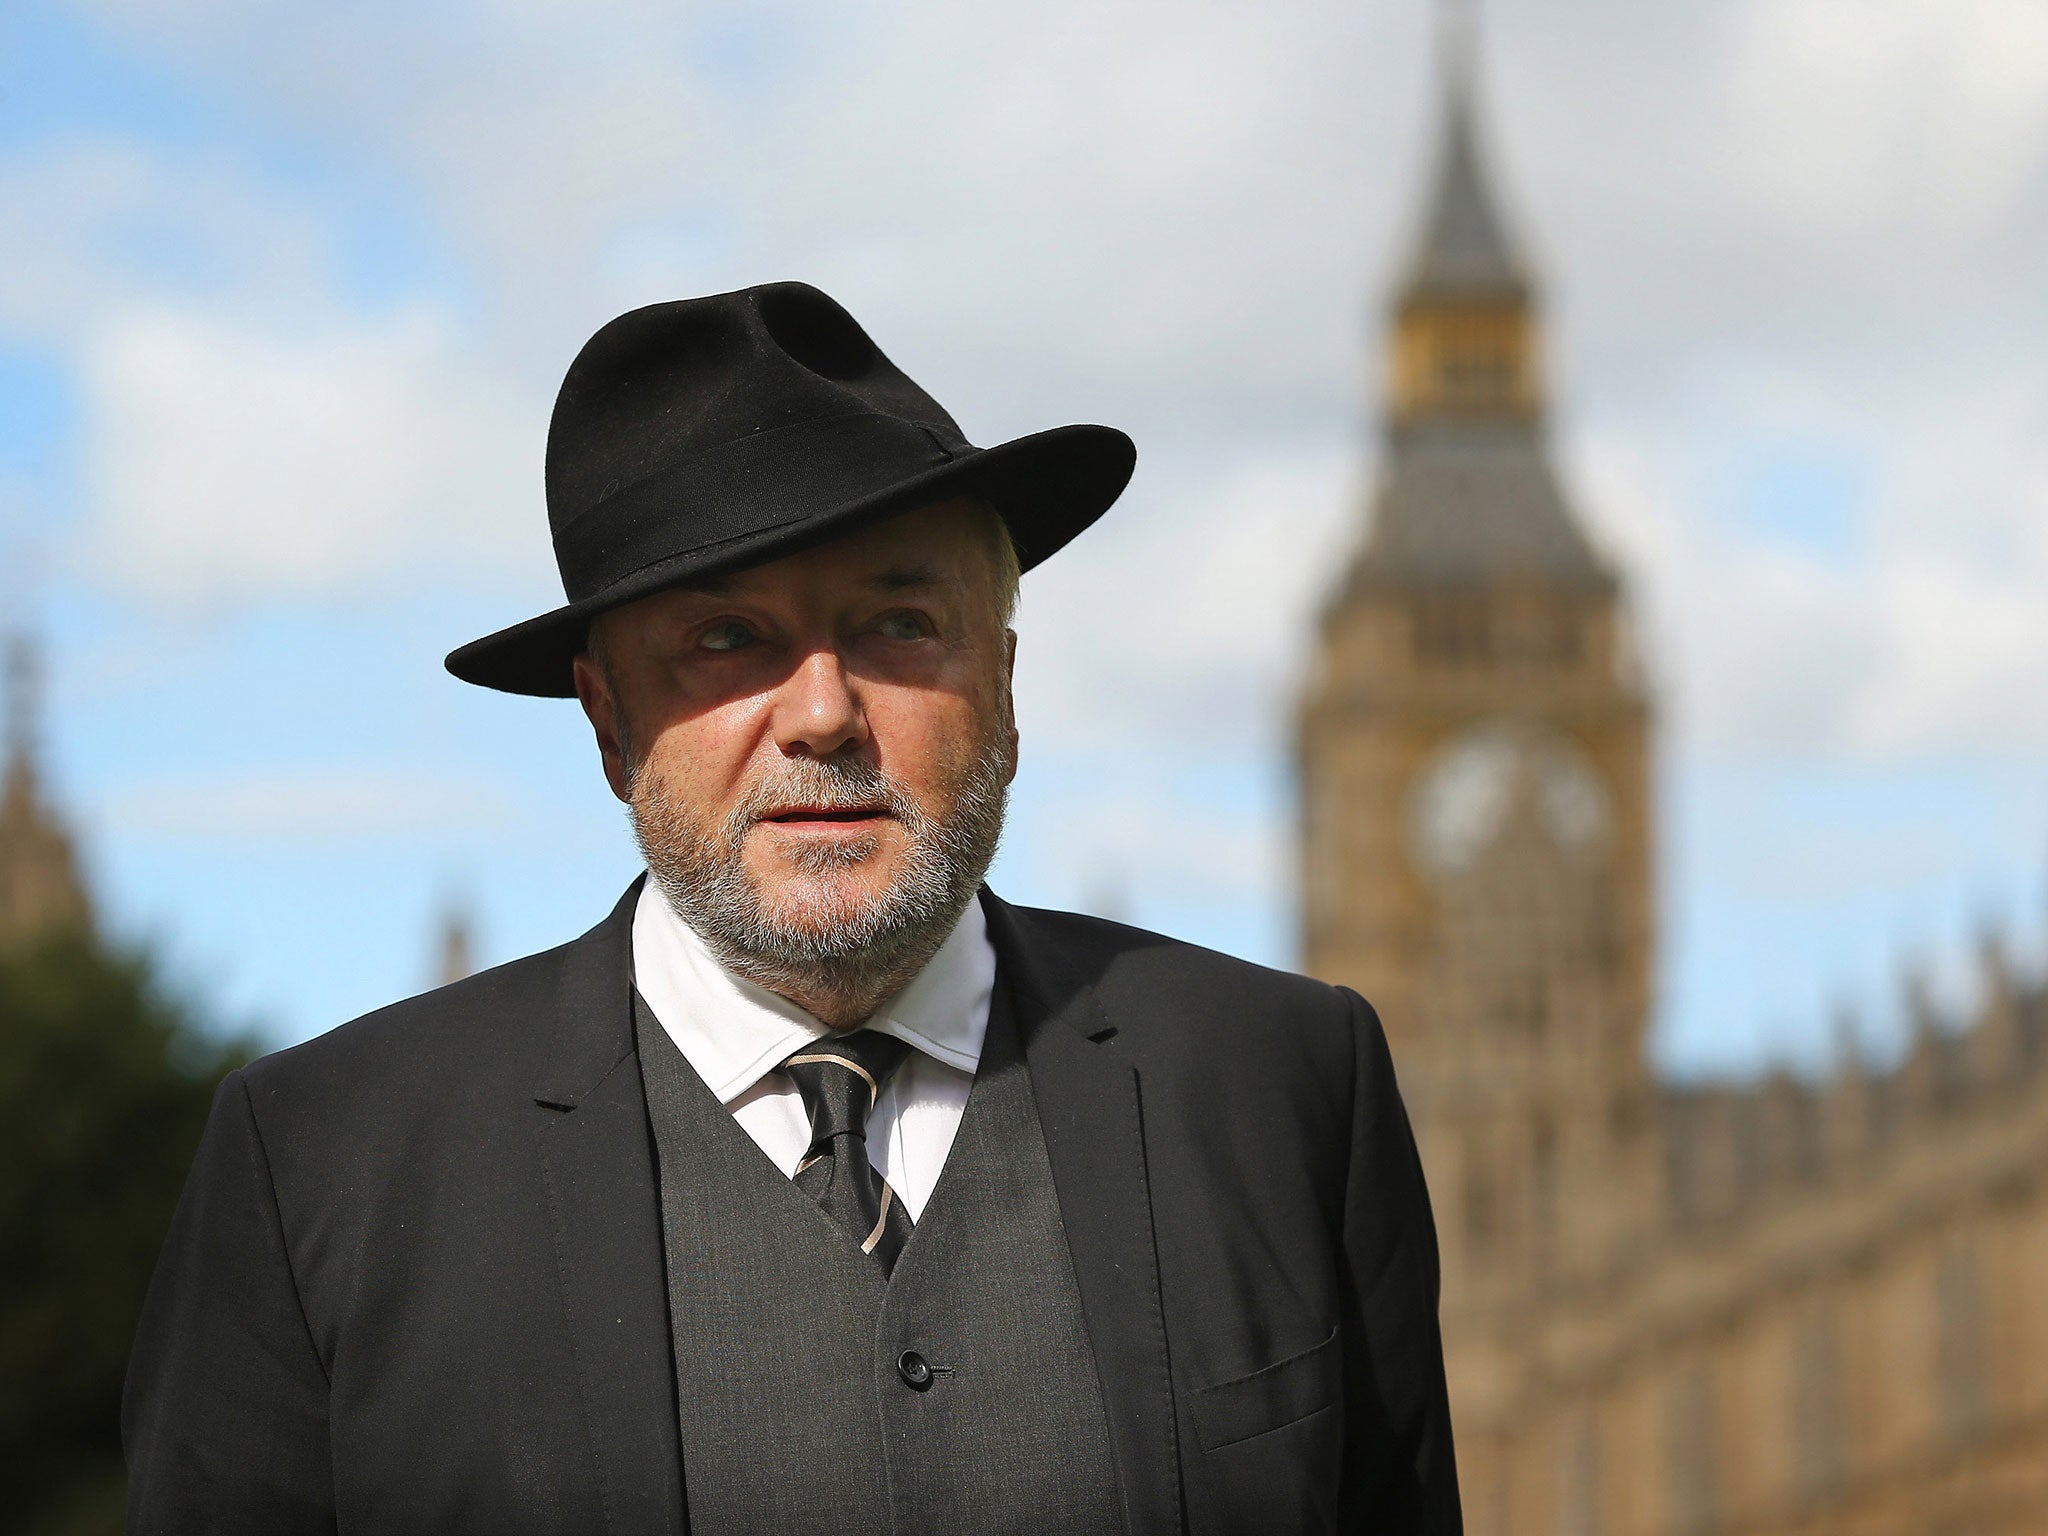 George Galloway has used Facebook to solicit donations for his campaign to become Mayor of London